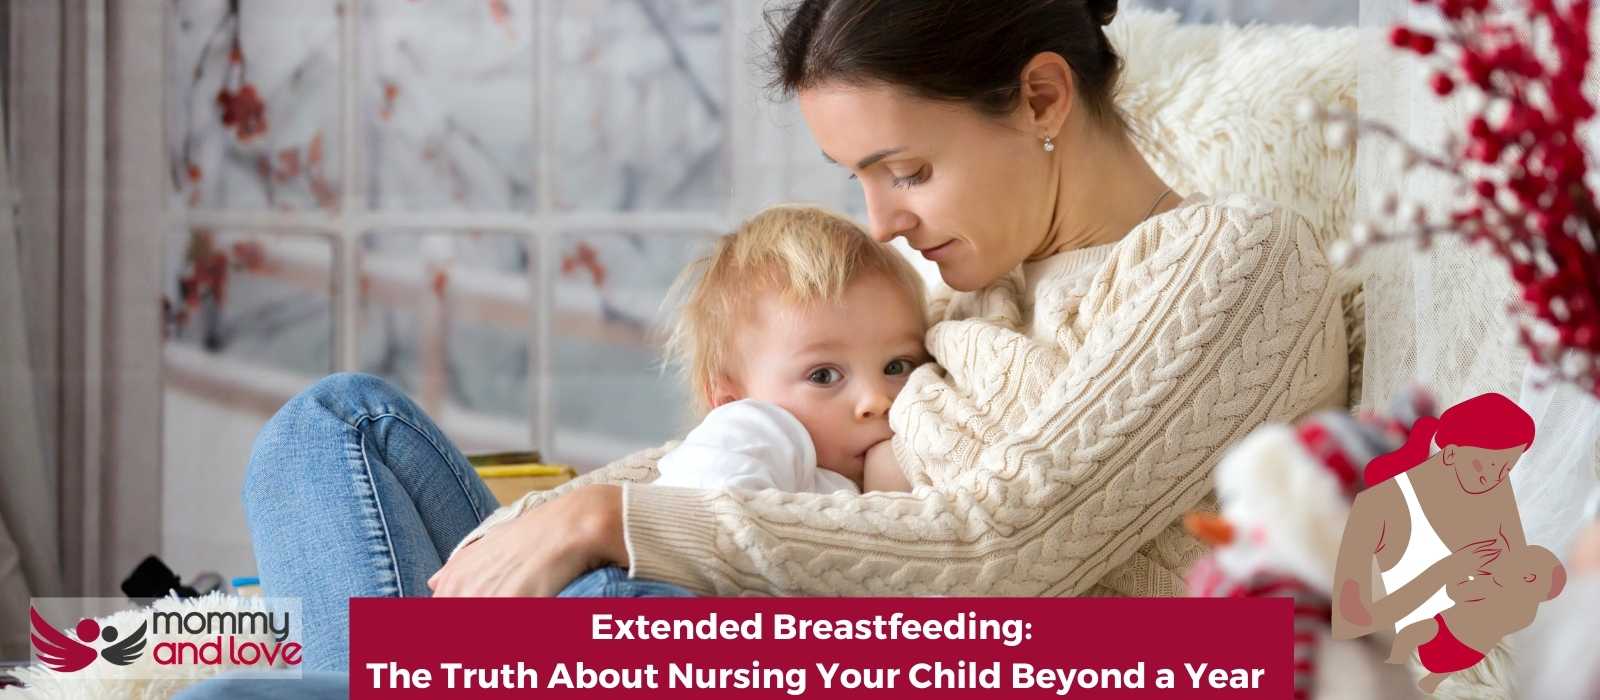 Extended Breastfeeding: The Truth About Nursing Your Child Beyond a Year